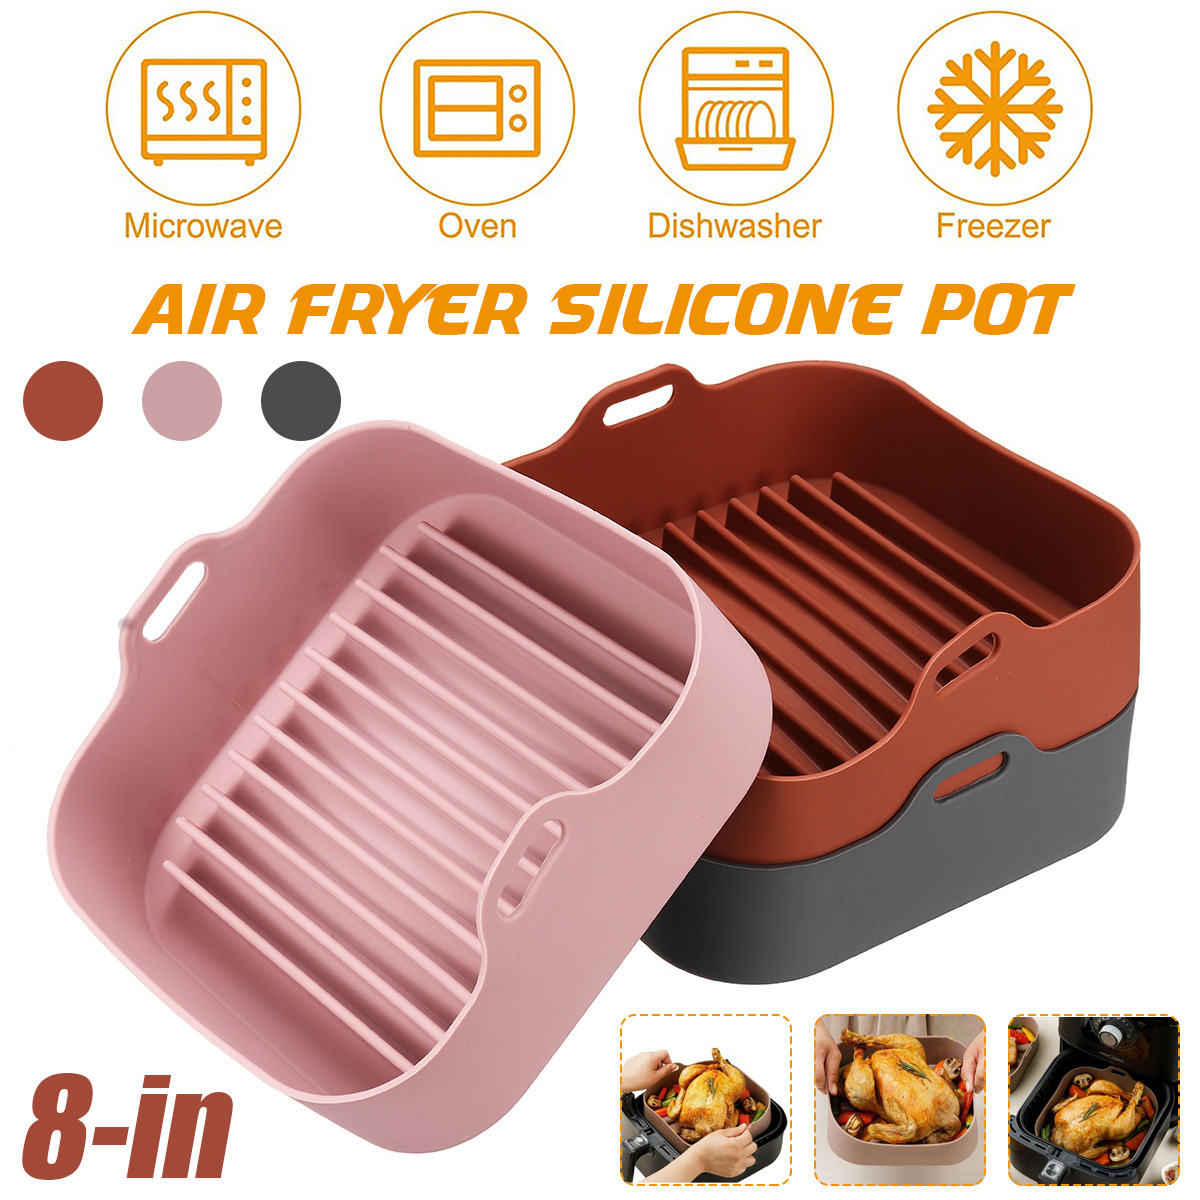 Multifunctional-Silicone-Baking-Tray-High-Temperature-Resistant-Non-stick-Bread-Fried-Baking-Pan-wit-1864776-1